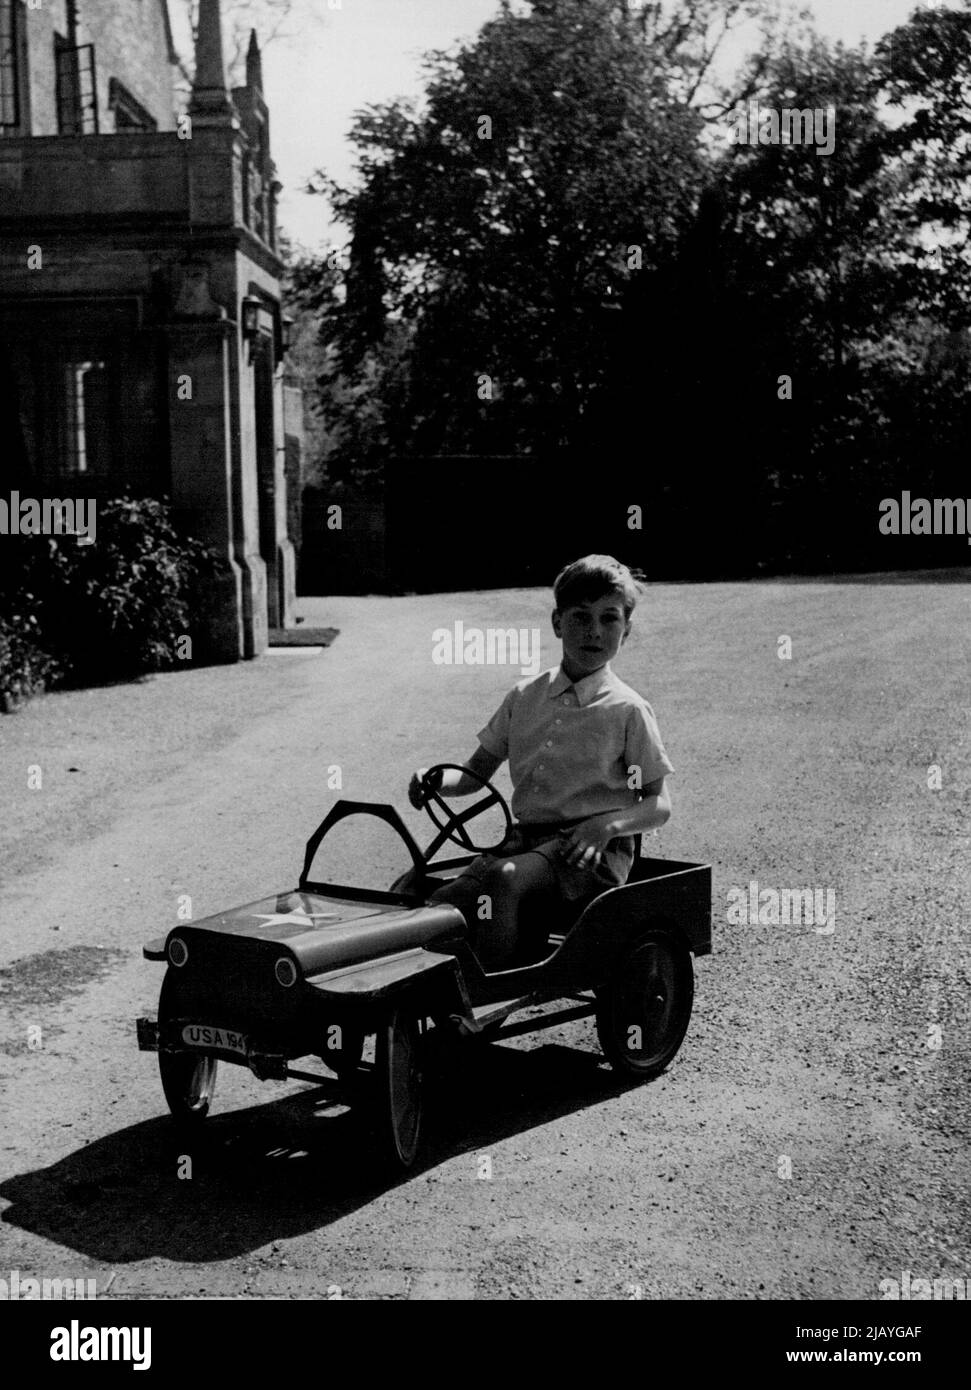 The Young Prince of Gloucester -- Photographed at the Manor House, Barnwell in Northamptonshire, the country seat of the Duke and Duchess of Gloucester: Prince William in his jeep. - Prince William was born Dece. 18, 1941. November 1, 1948. (Photo by Baron, Camera Press). Stock Photo